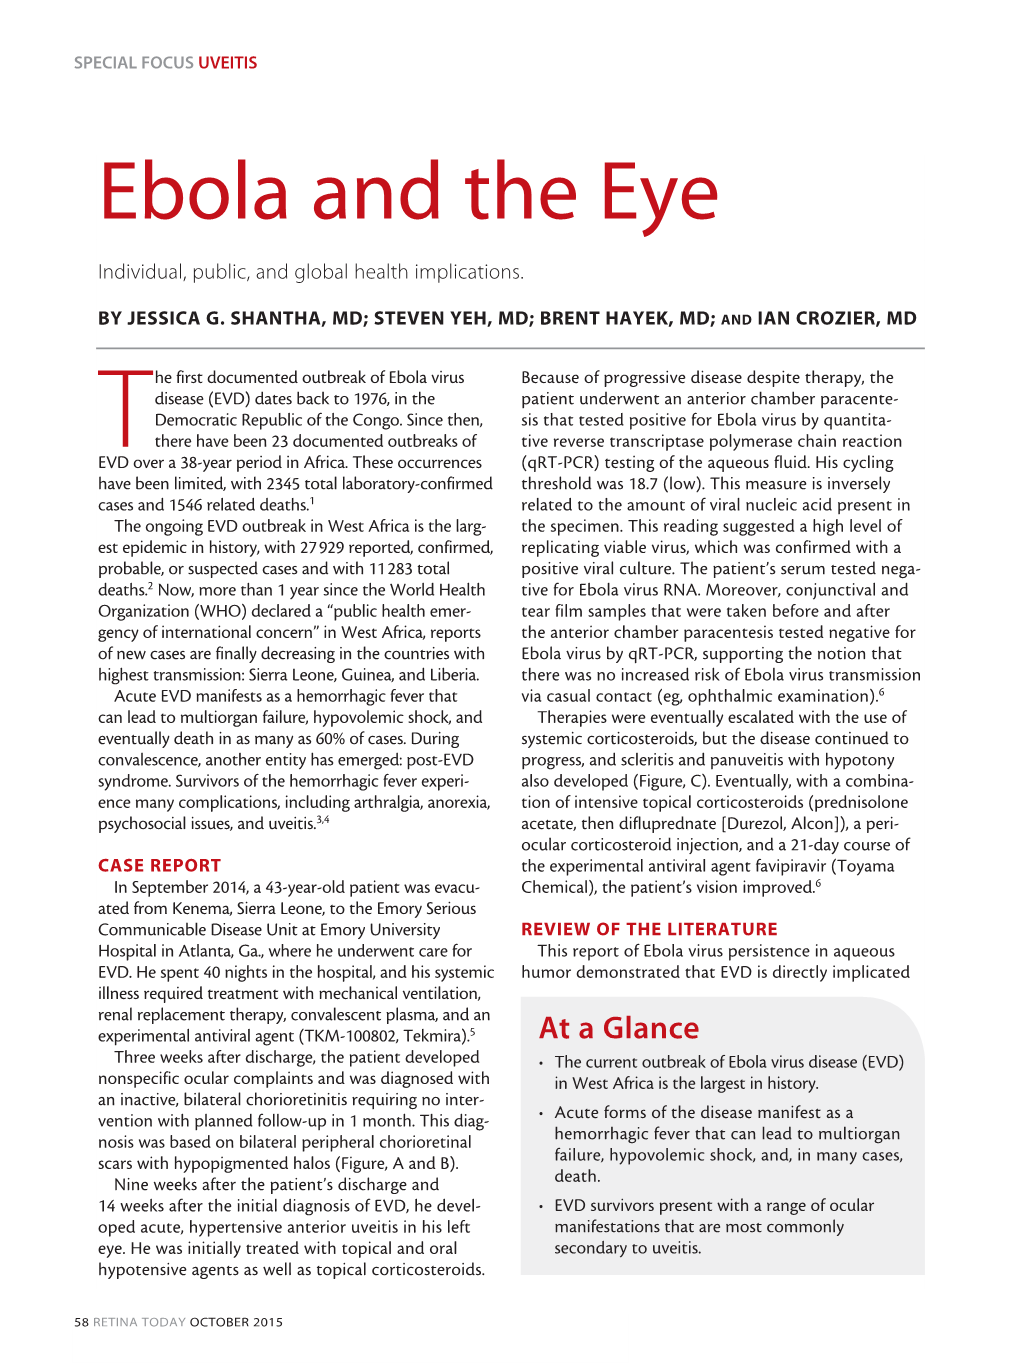 Ebola and the Eye